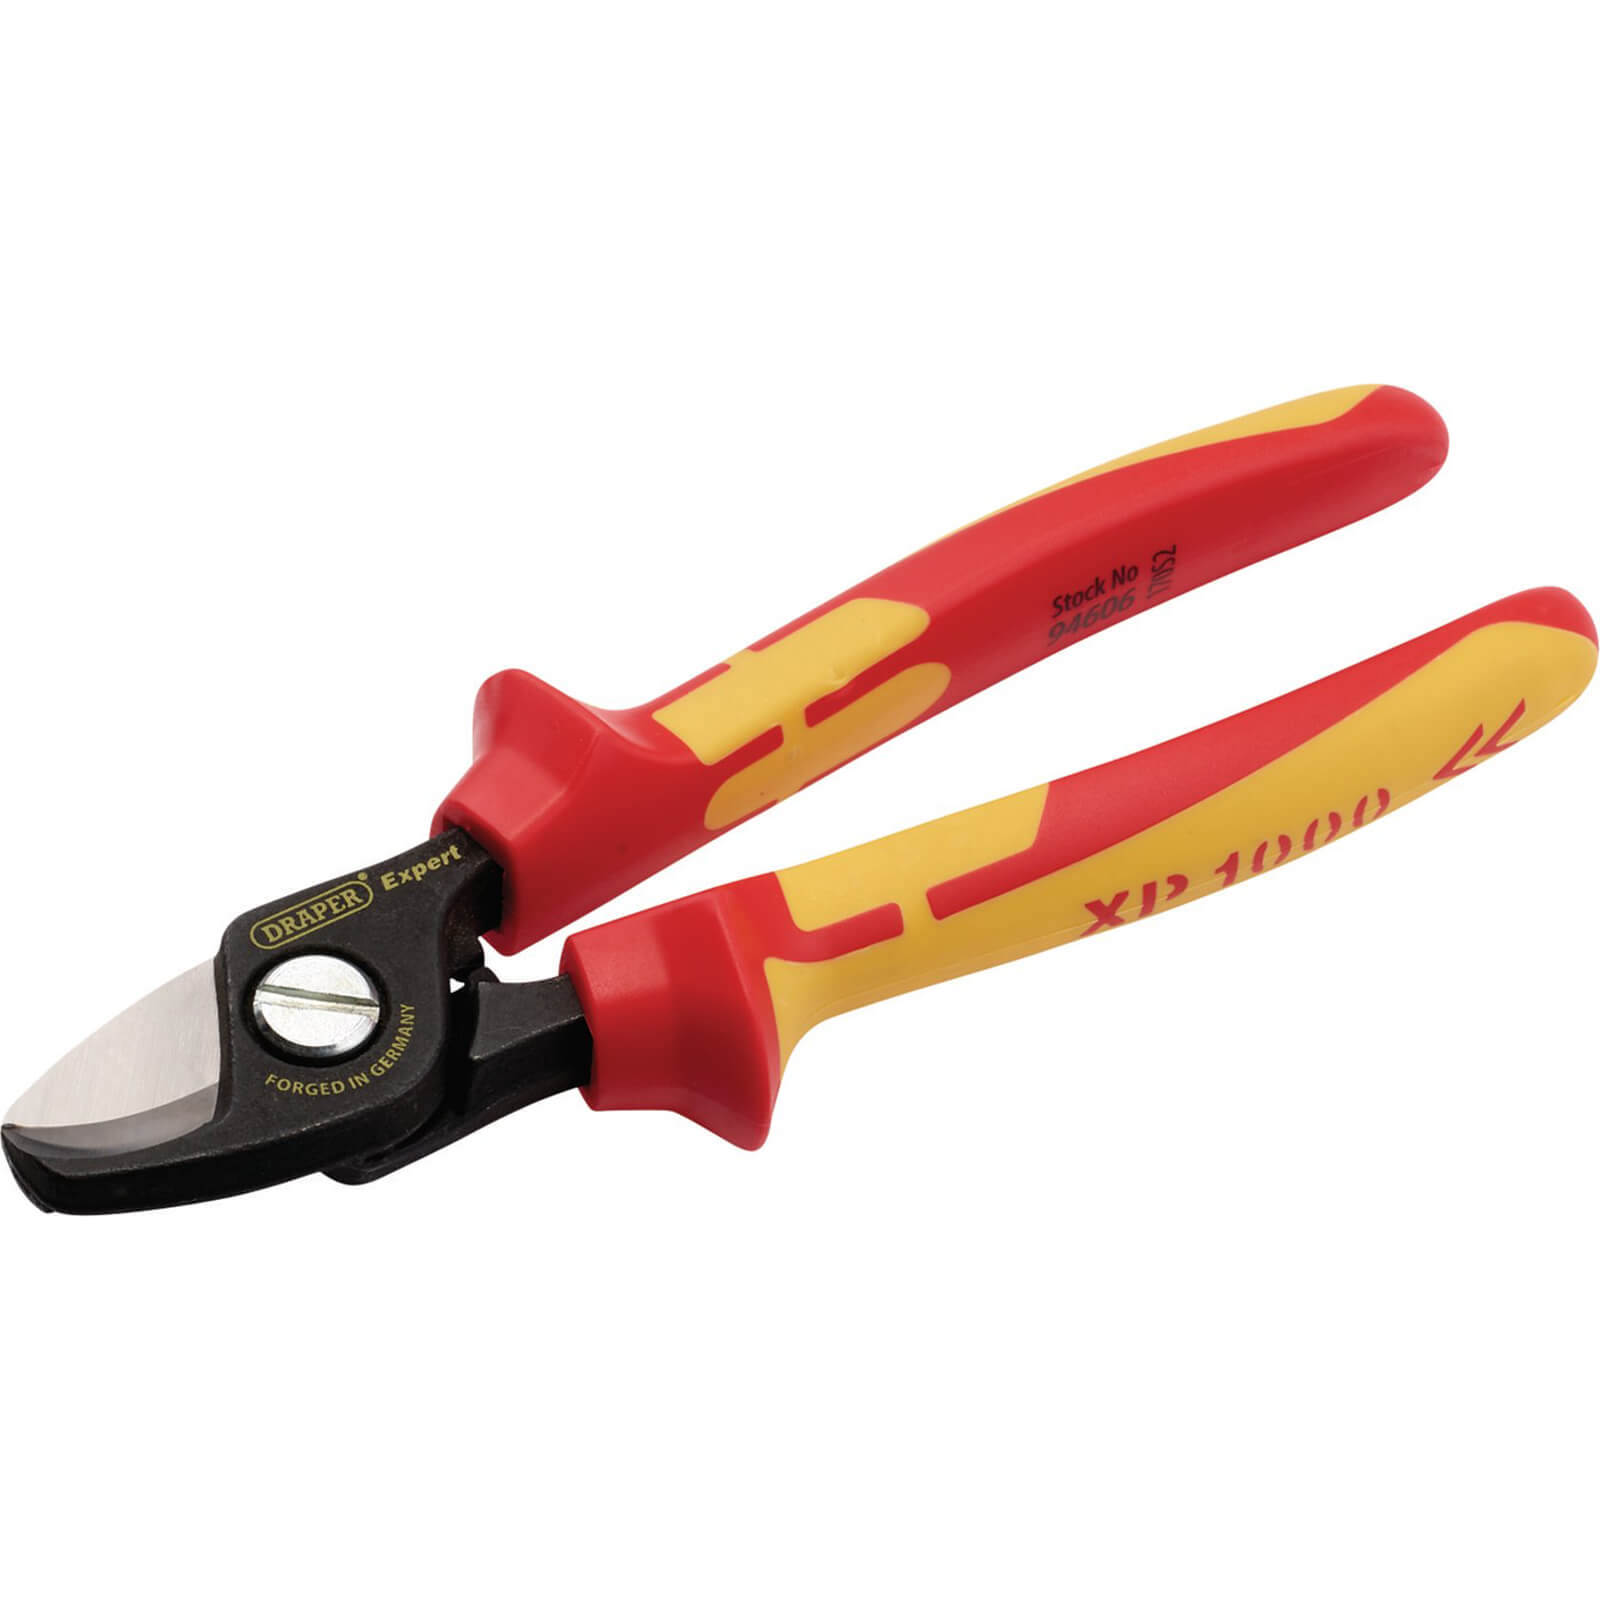 Draper XP1000 VDE Insulated Cable Shears 170mm